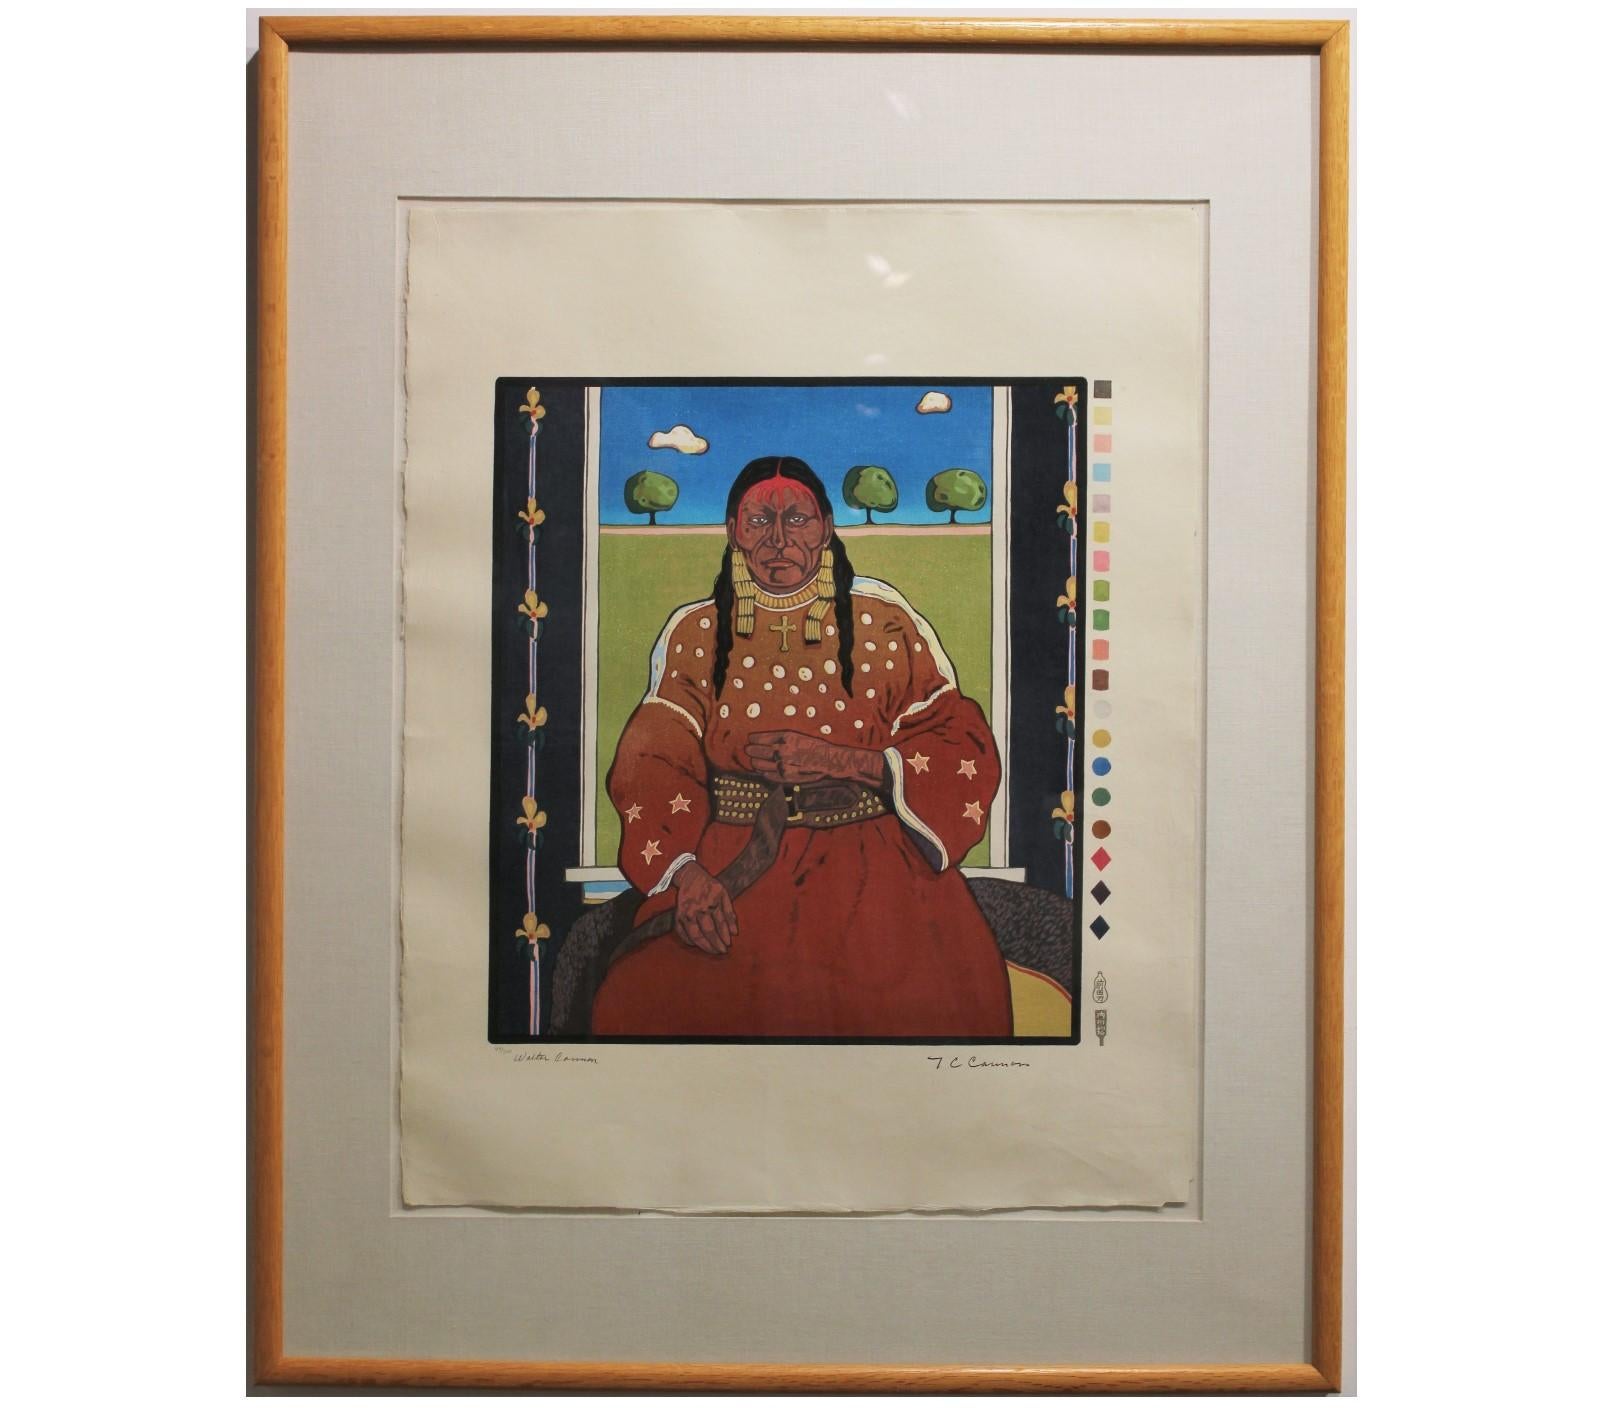 Bold and colorful portrait by renowned artist T.C. Cannon of a Native American woman in a red dress with a gold cross around her neck titled "Woman at the Window." Signed along bottom edge. Edition 44/200.  

Dimensions Without Frame: H 25.5 in. x W